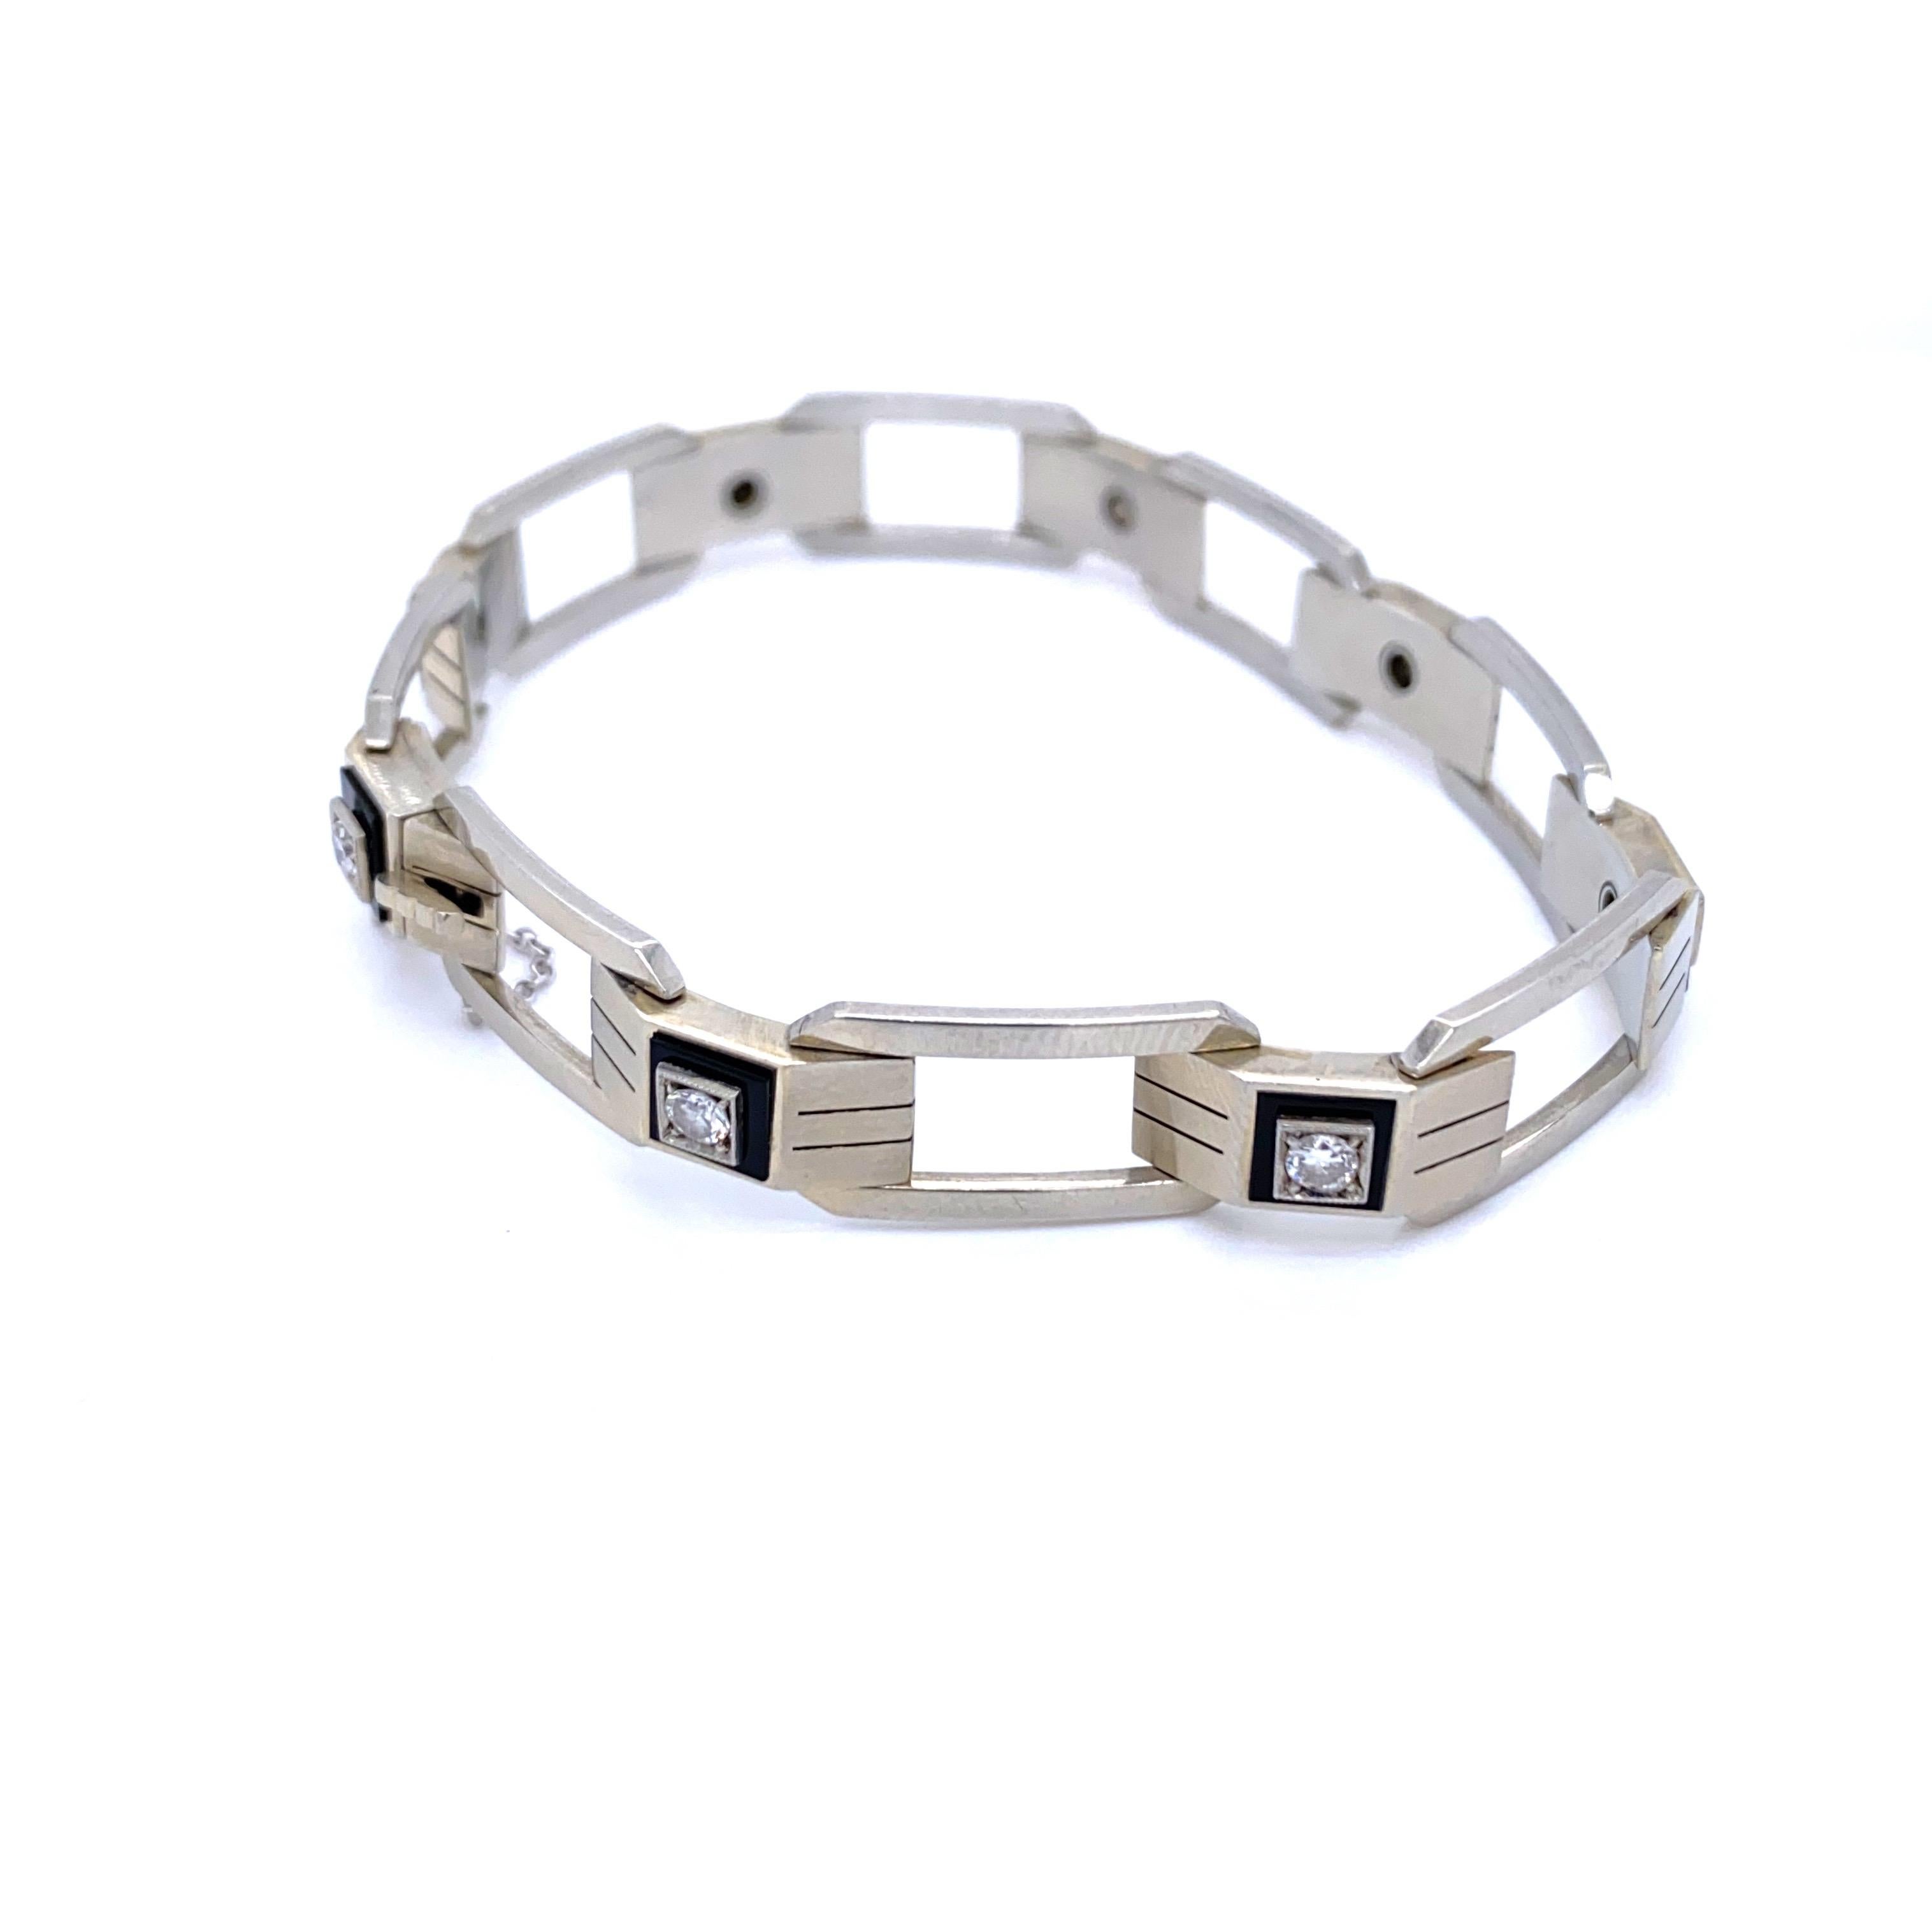 Classic Art Deco character in this unusual and rare link bracelet. It features 7 Round cut Diamond, totaling approximately 1.10 carats G color Vvs Clarity, framed in a custom cut Onyx square, all set in solid 18k white Gold.
Safety chain and lock